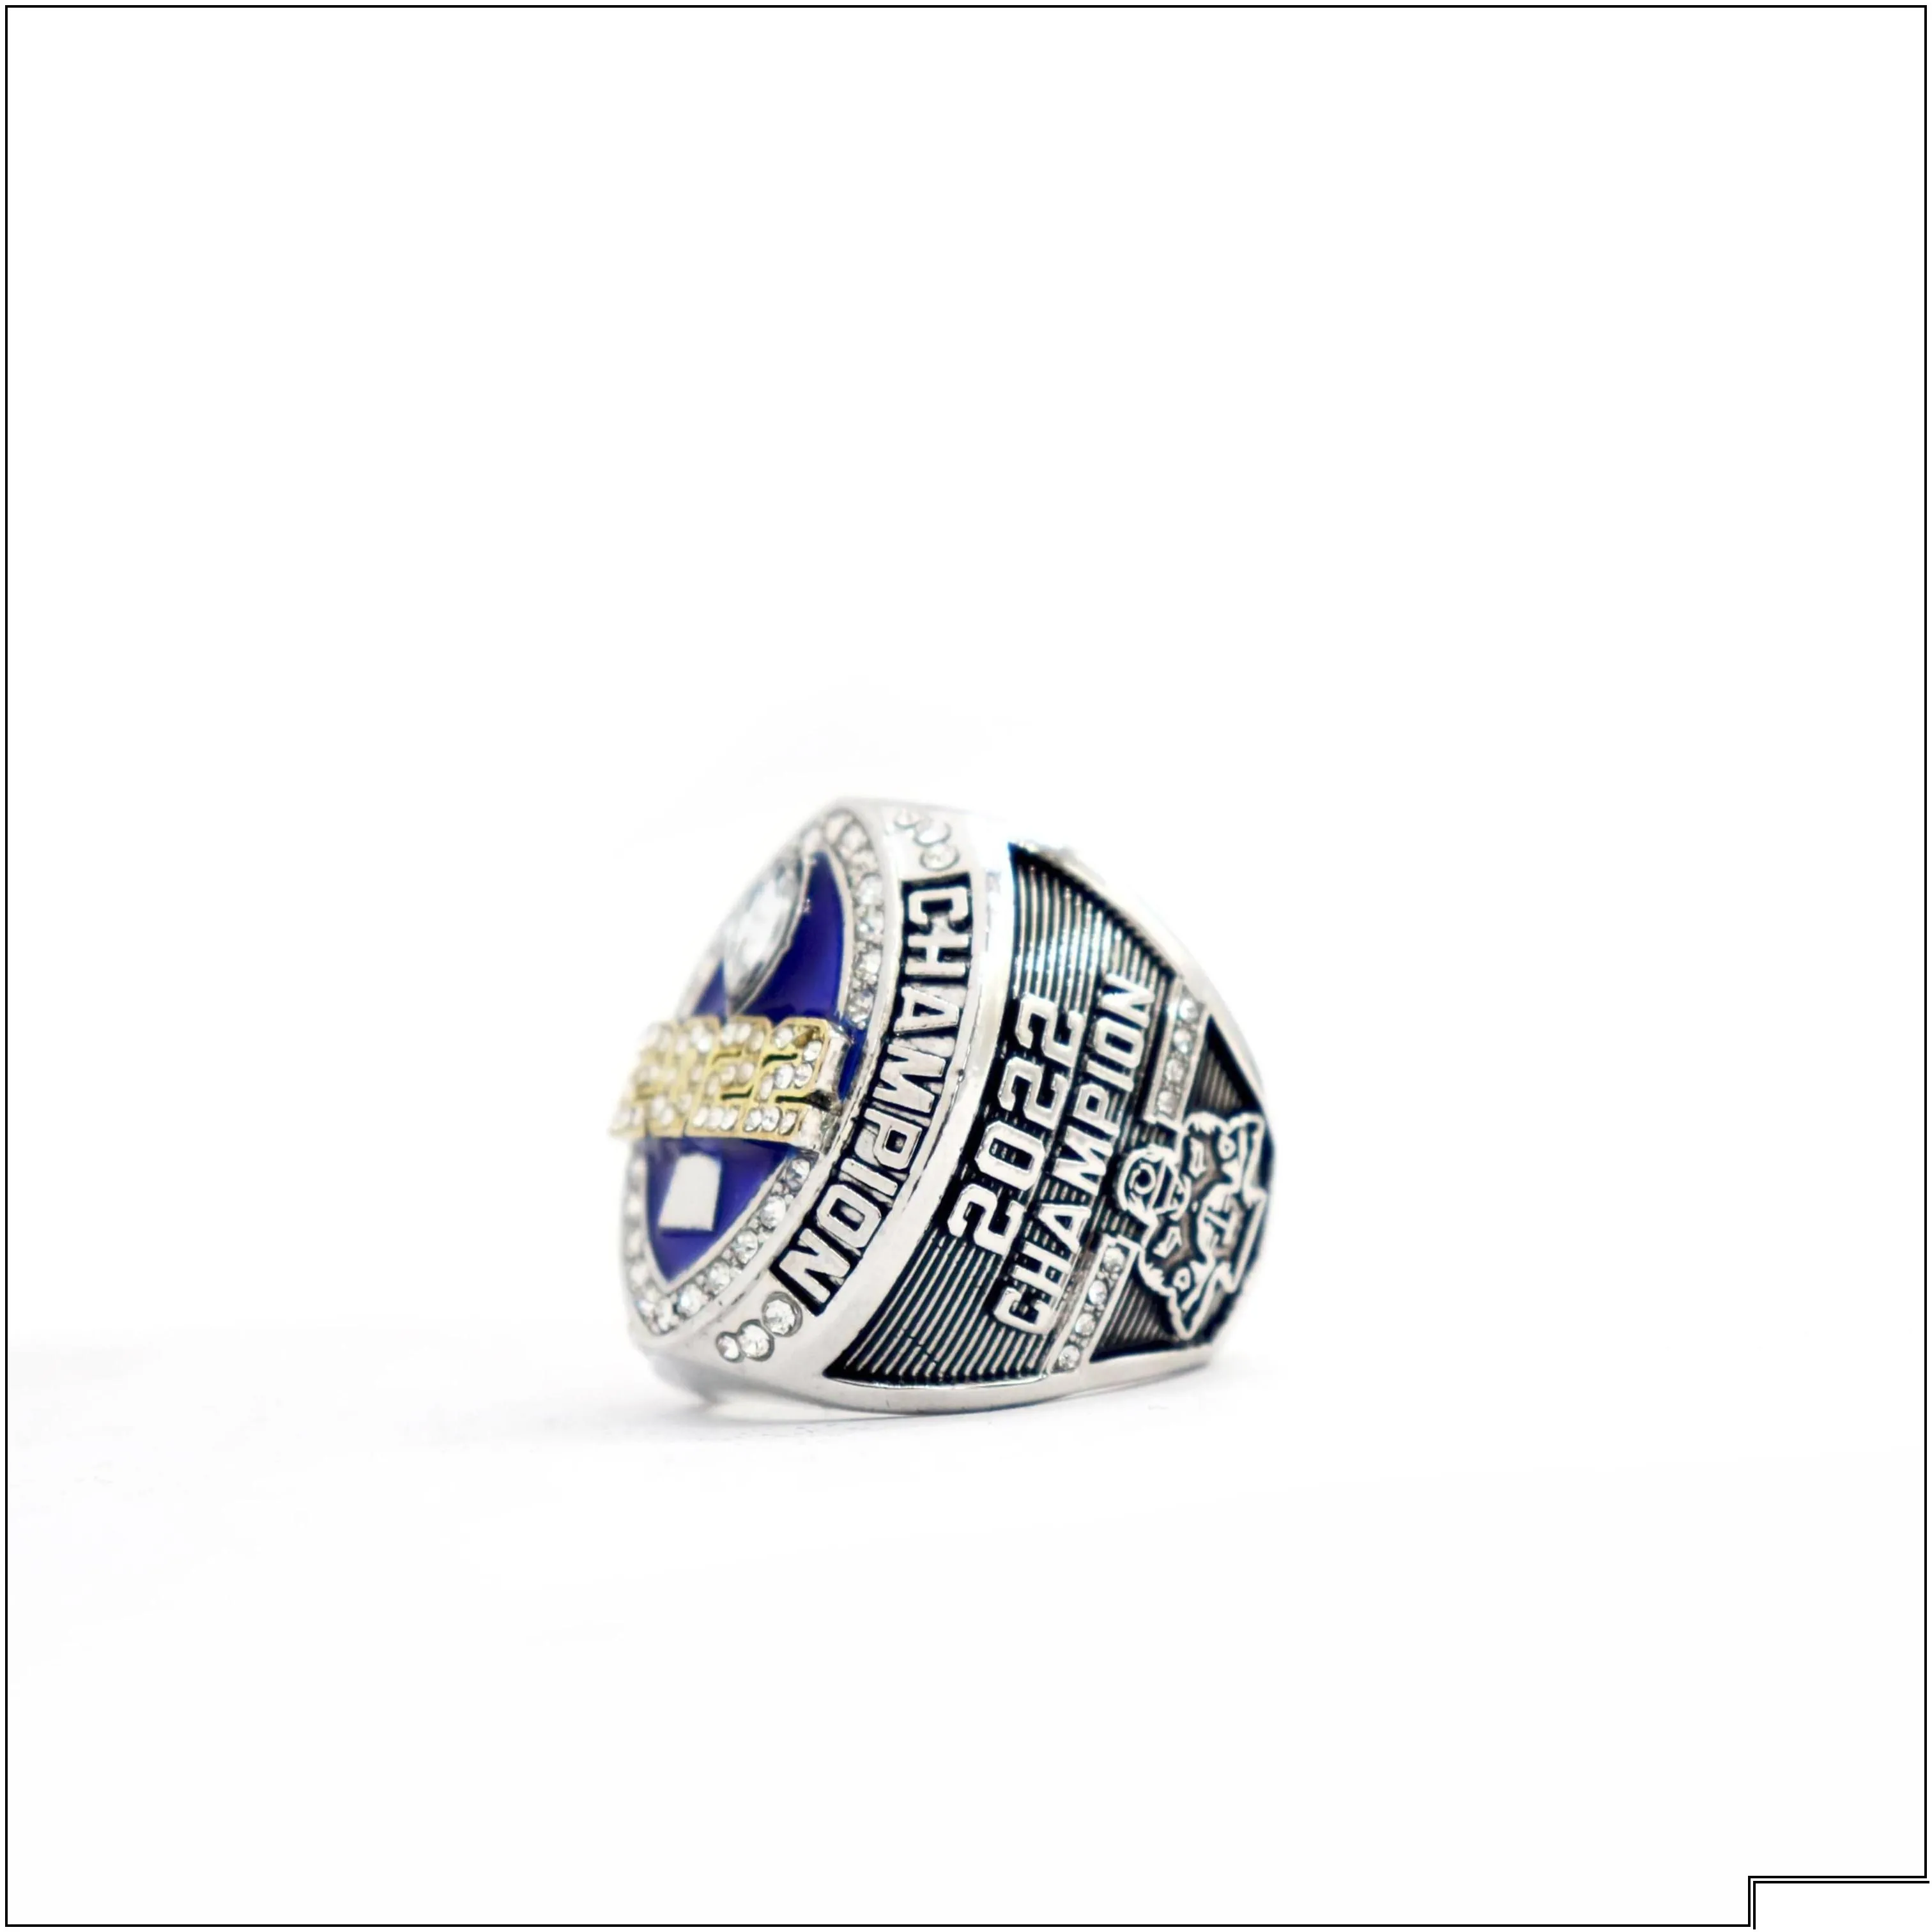 Cluster Rings Cluster Rings S 2022 Blues Style Fantasy Football Championship Fl Size 814 Drop Delivery 2021 Jewelry Chainworldzl Dhxb5 Dhzz7